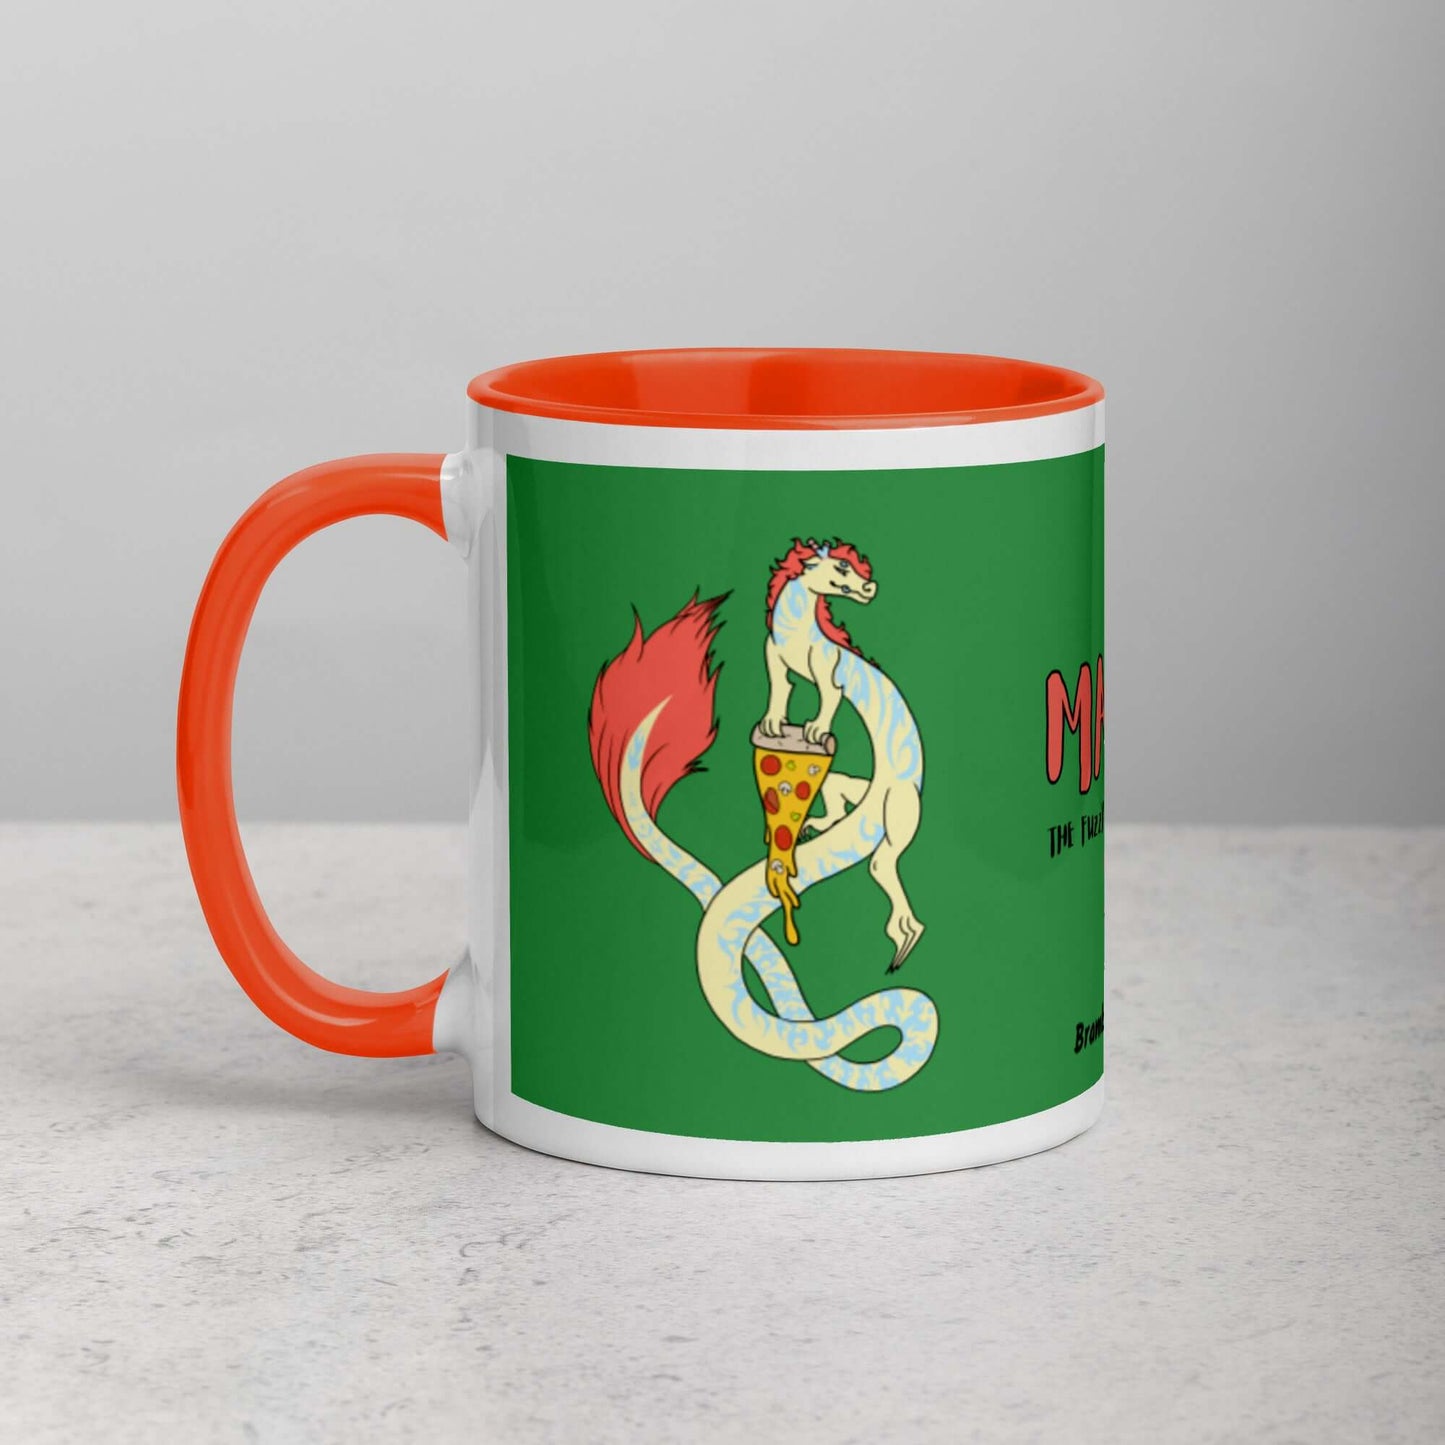 11 ounce white ceramic mug. Orange inside and handle. Features double-sided image of Maisy the Fuzzy Noodle Dragon with a slice of pizza. Shown on tabletop.